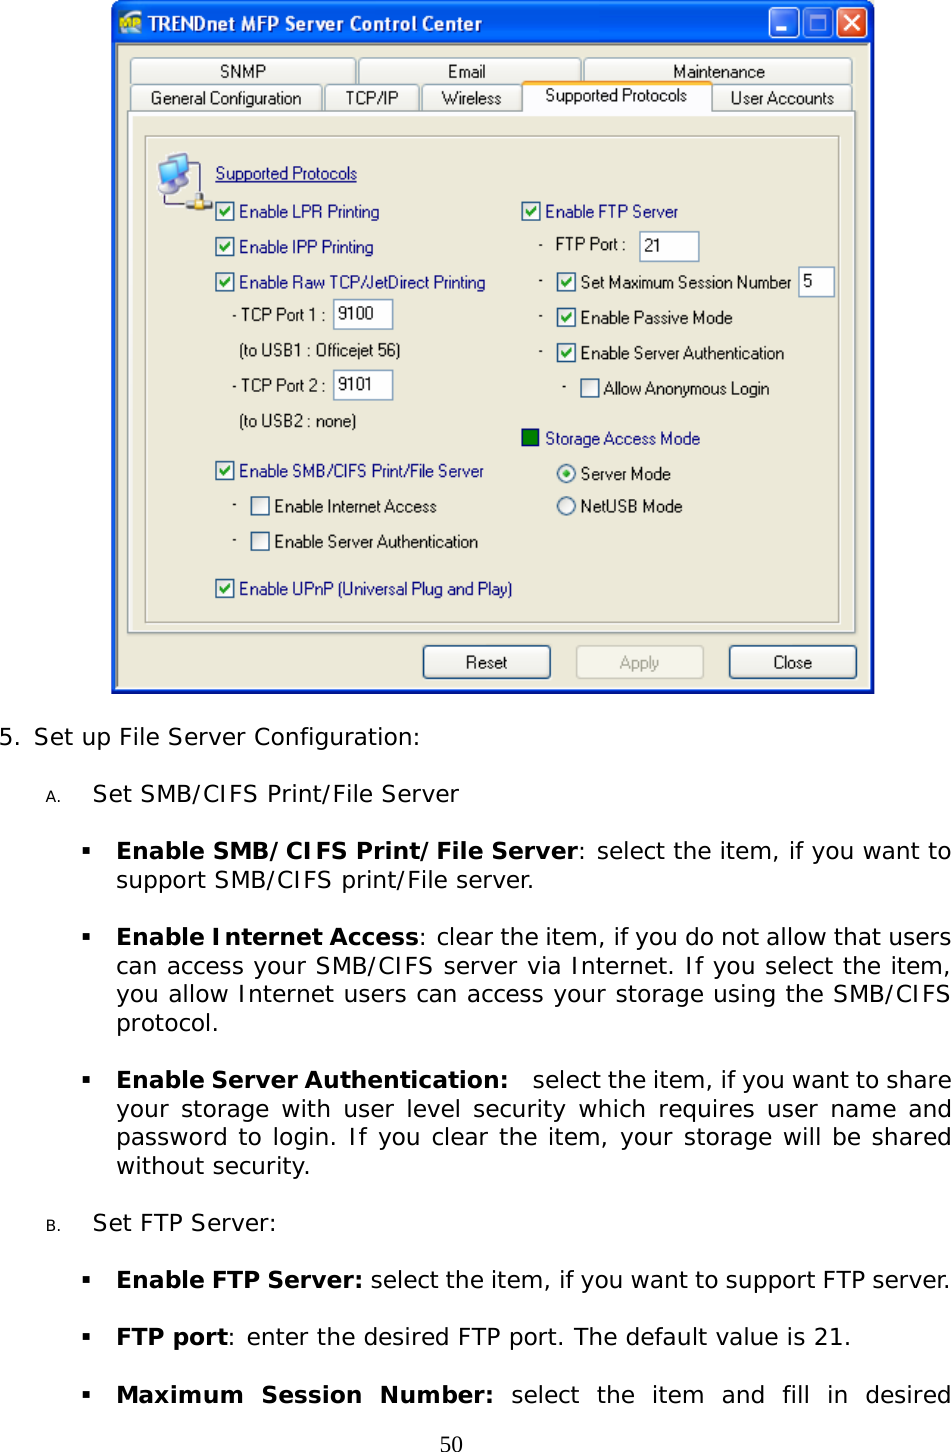     50  5. Set up File Server Configuration:  A. Set SMB/CIFS Print/File Server   Enable SMB/CIFS Print/File Server: select the item, if you want to support SMB/CIFS print/File server.   Enable Internet Access: clear the item, if you do not allow that users can access your SMB/CIFS server via Internet. If you select the item, you allow Internet users can access your storage using the SMB/CIFS protocol.   Enable Server Authentication:    select the item, if you want to share your storage with user level security which requires user name and password to login. If you clear the item, your storage will be shared without security.  B. Set FTP Server:    Enable FTP Server: select the item, if you want to support FTP server.   FTP port: enter the desired FTP port. The default value is 21.    Maximum Session Number: select the item and fill in desired 